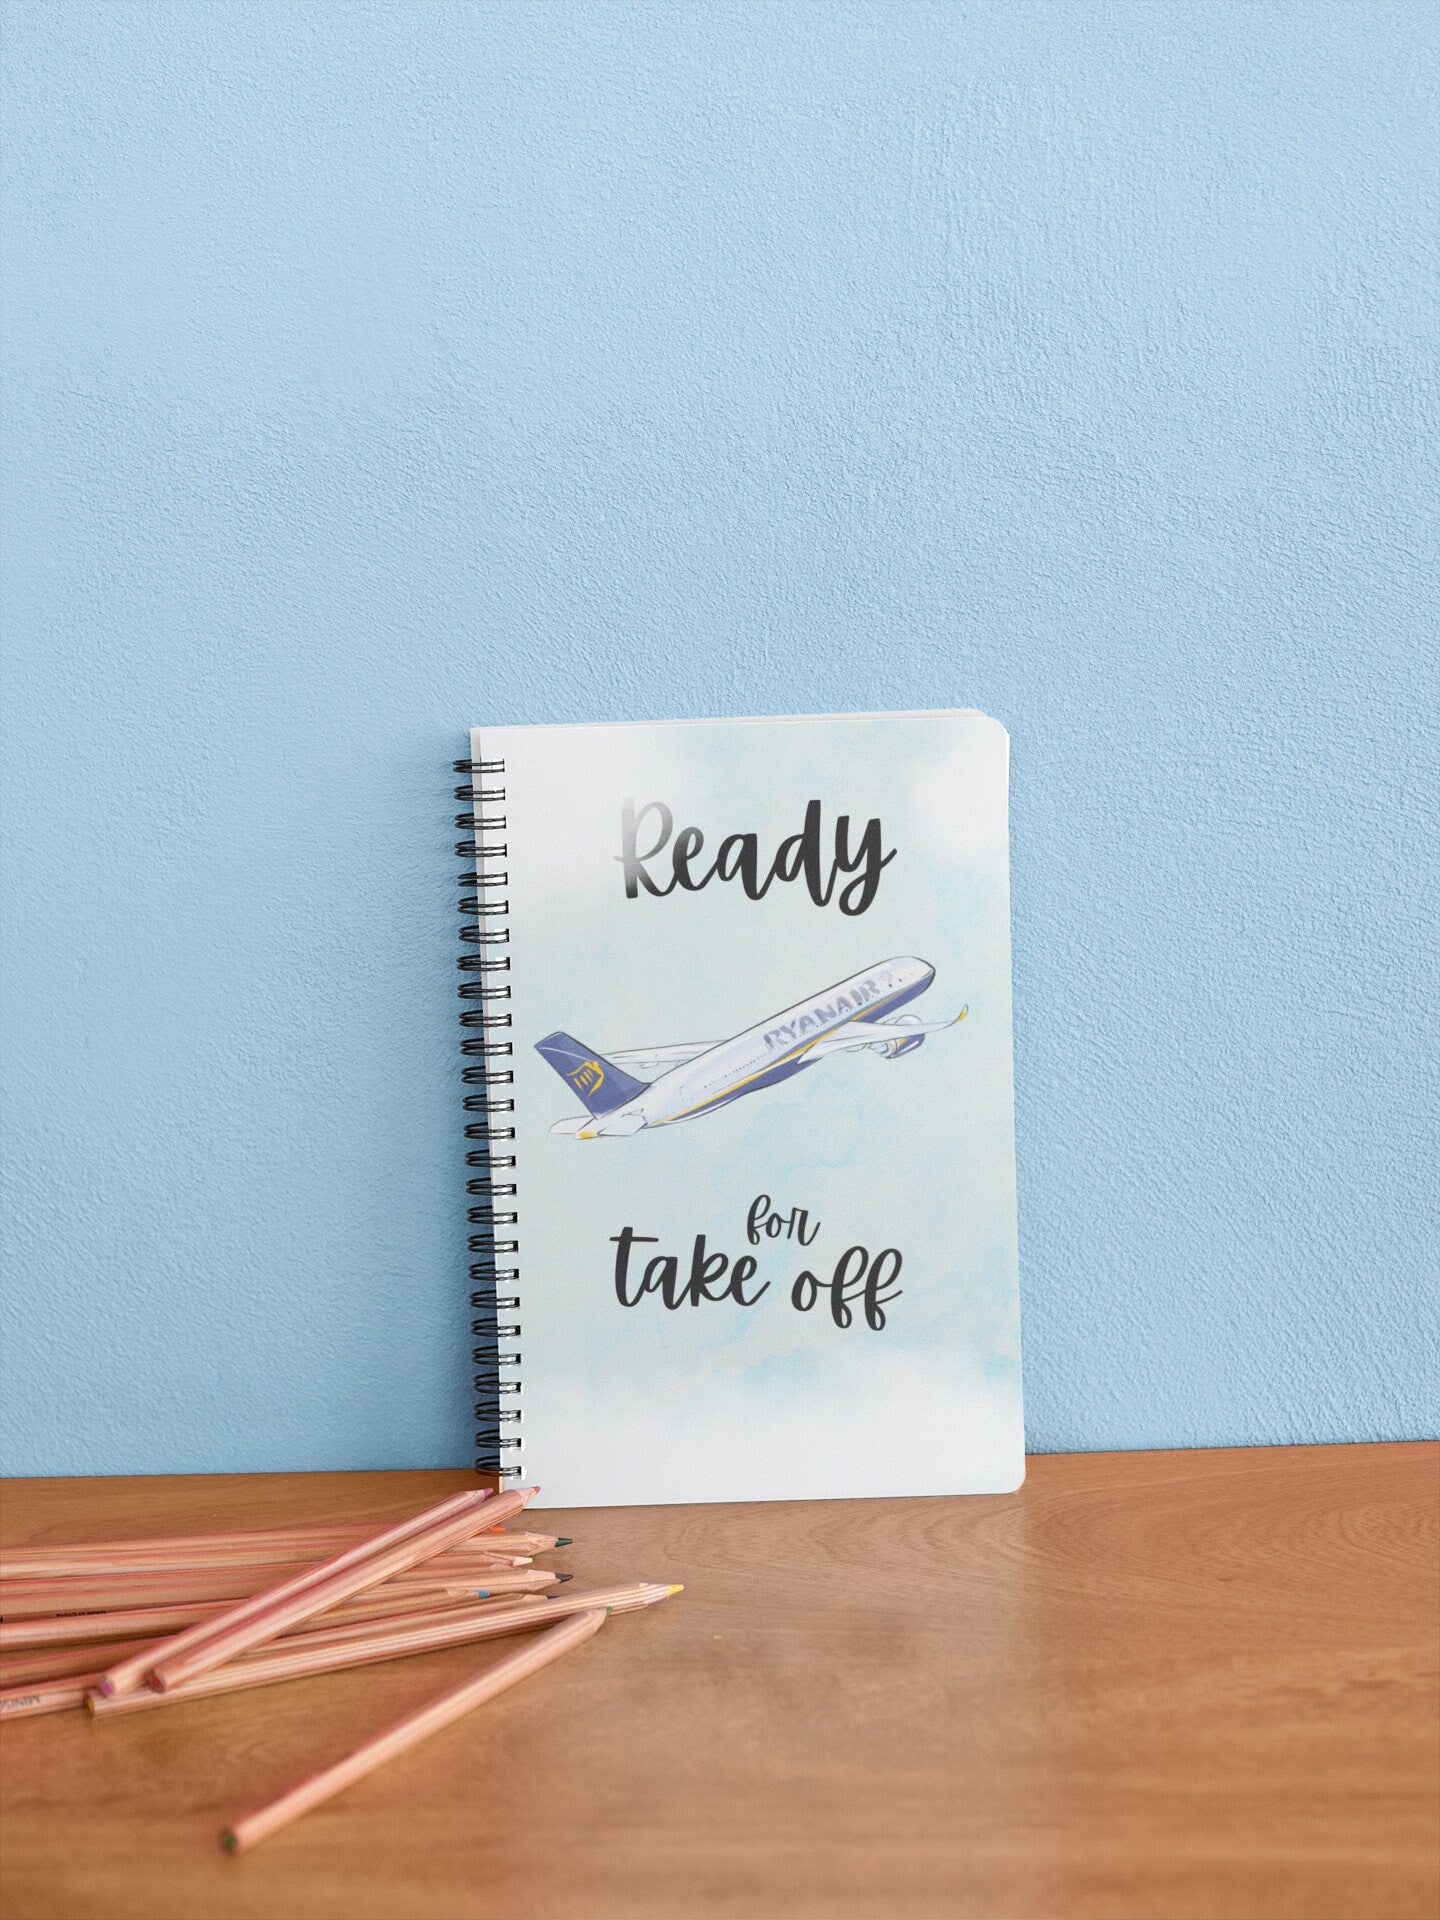 Any Airline | Ready For Take Off | Cabin Crew Notebook | Flight Attendant, Pilot Gift | Wings Ceremony Gift